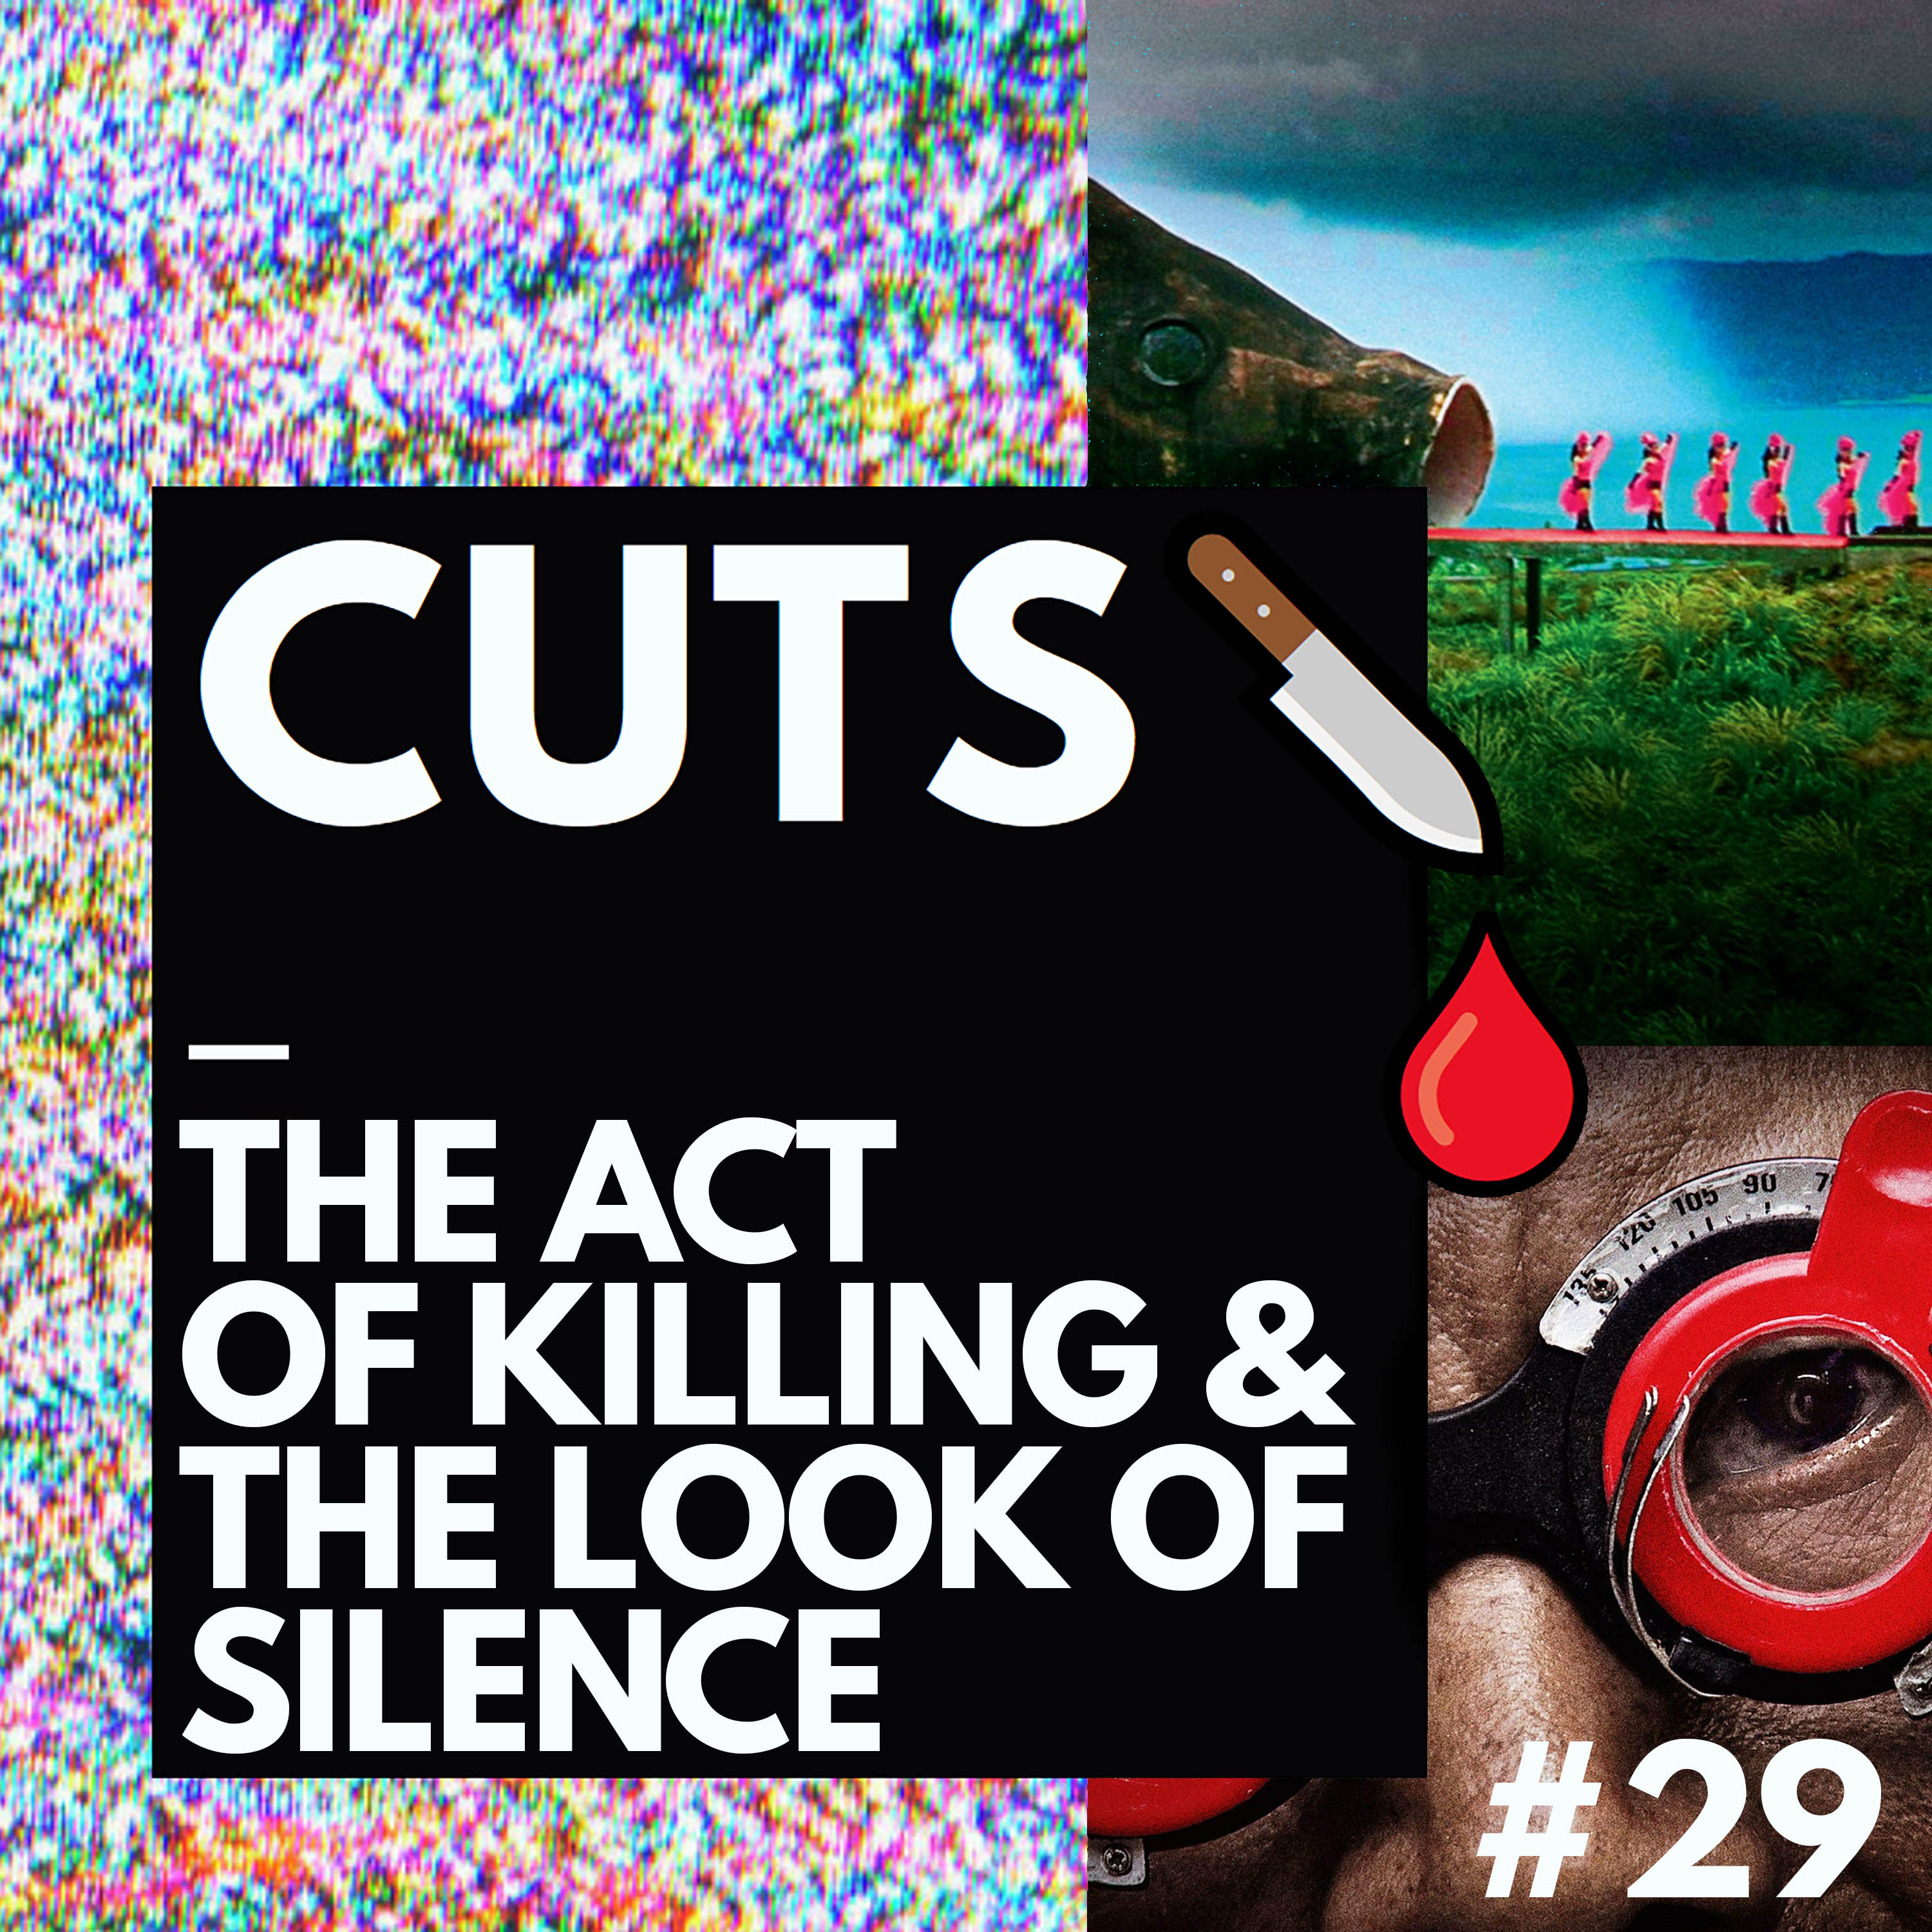 #29 Classics: The Act of Killing & The Look of Silence